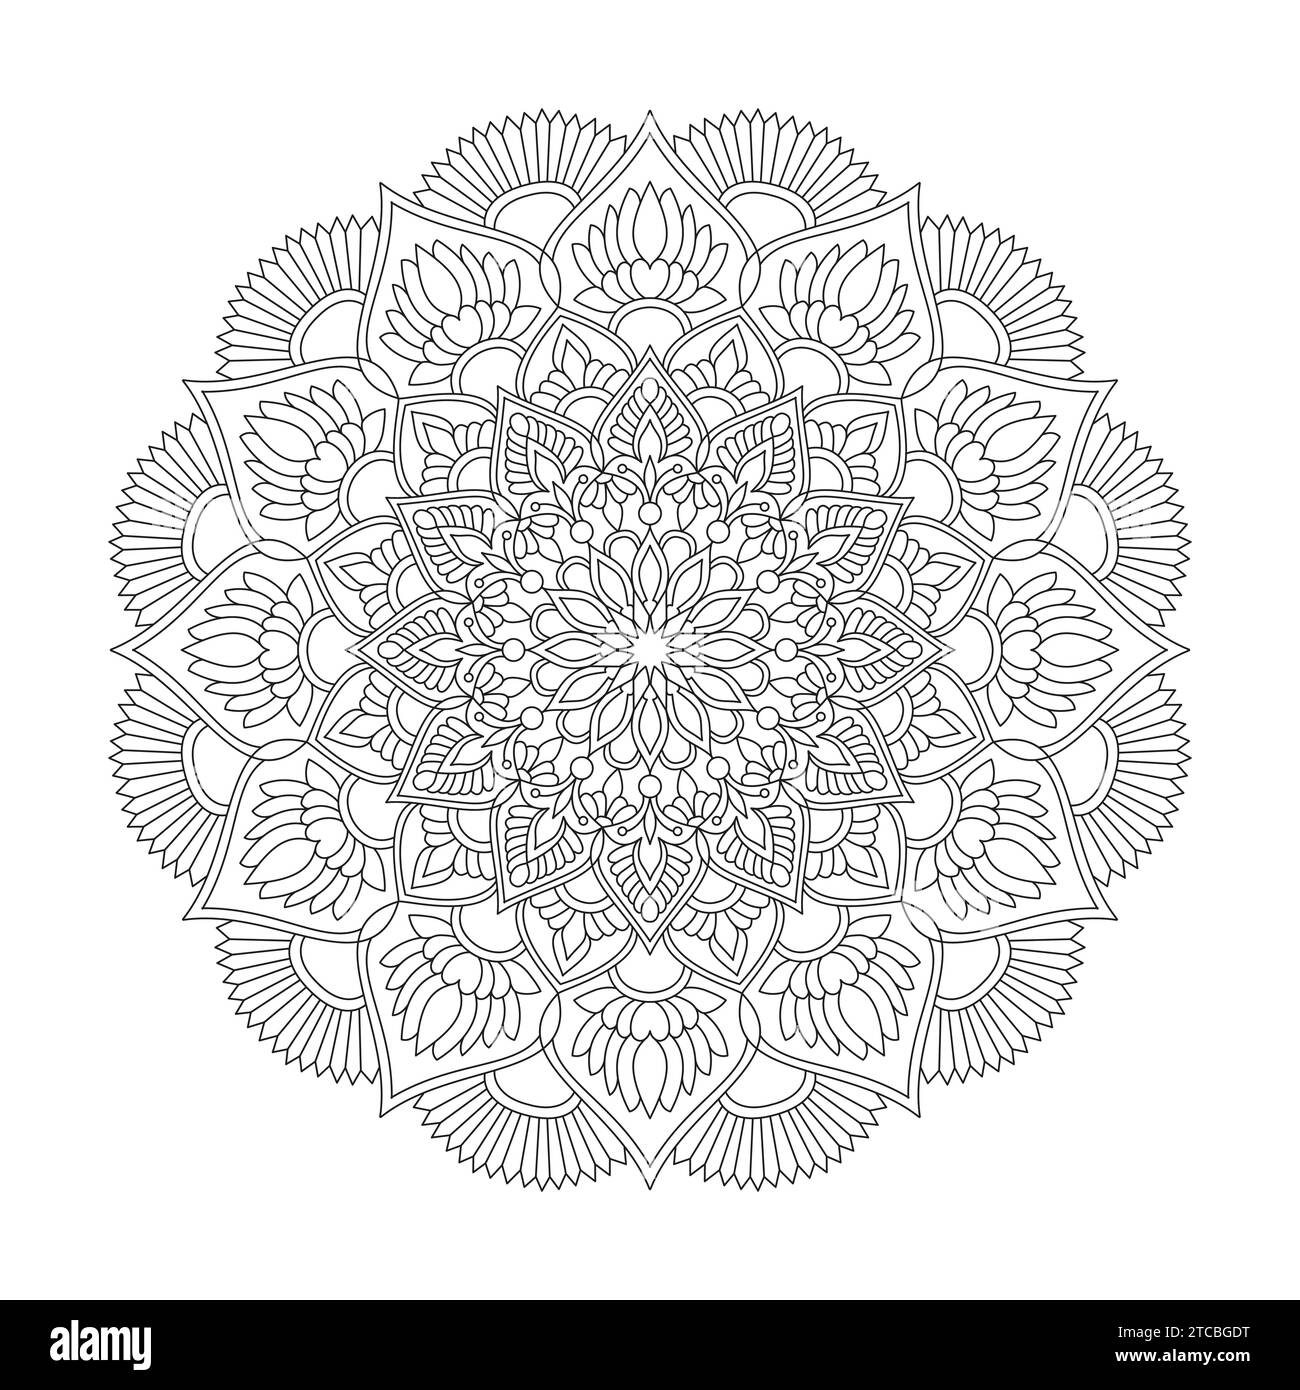 Adult circle of serenity mandala colouring book page for KDP book interior. Peaceful Petals, Ability to Relax, Brain Experiences, Harmonious Haven, Pea Stock Vector